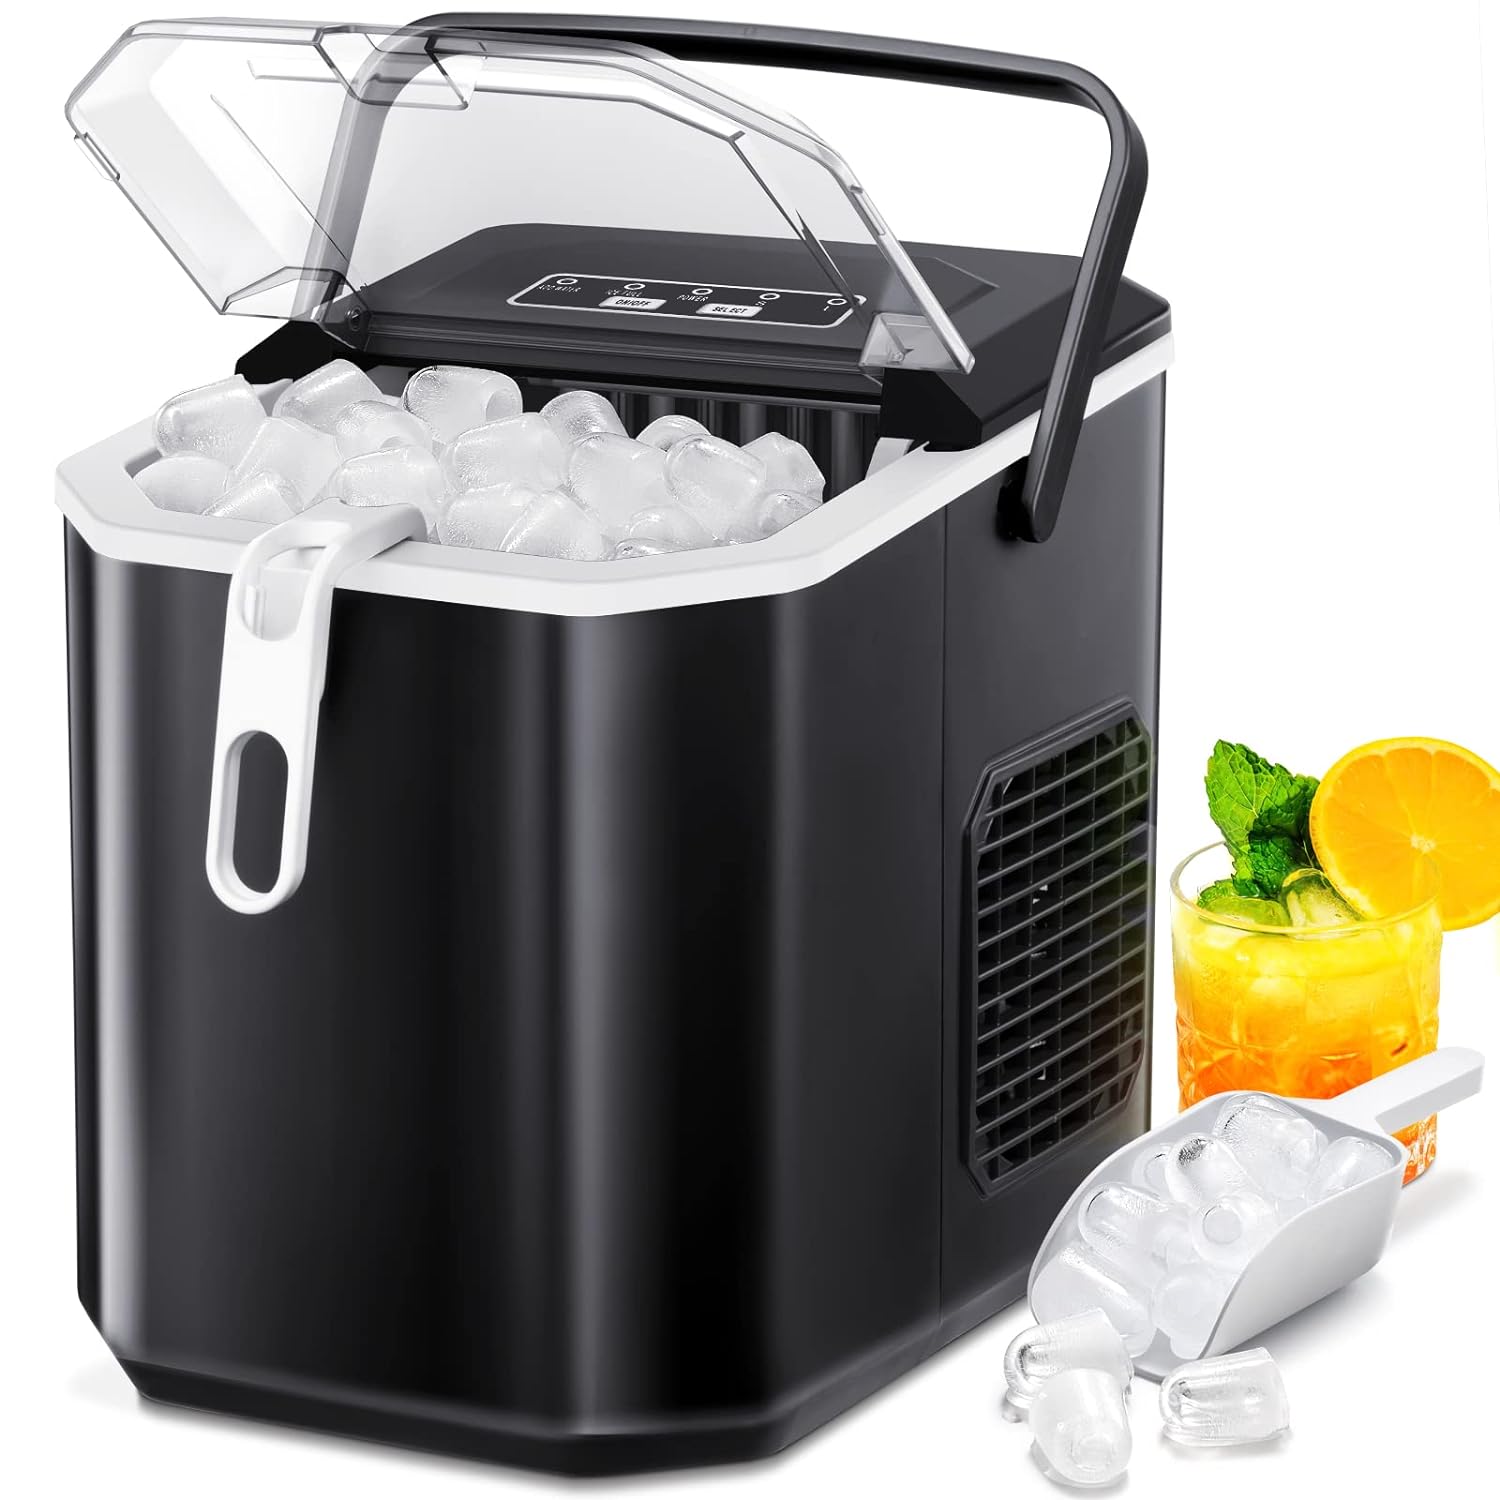 This ice maker is awesome! I use it all the time. The ice cubes are a great size for your drinks. 